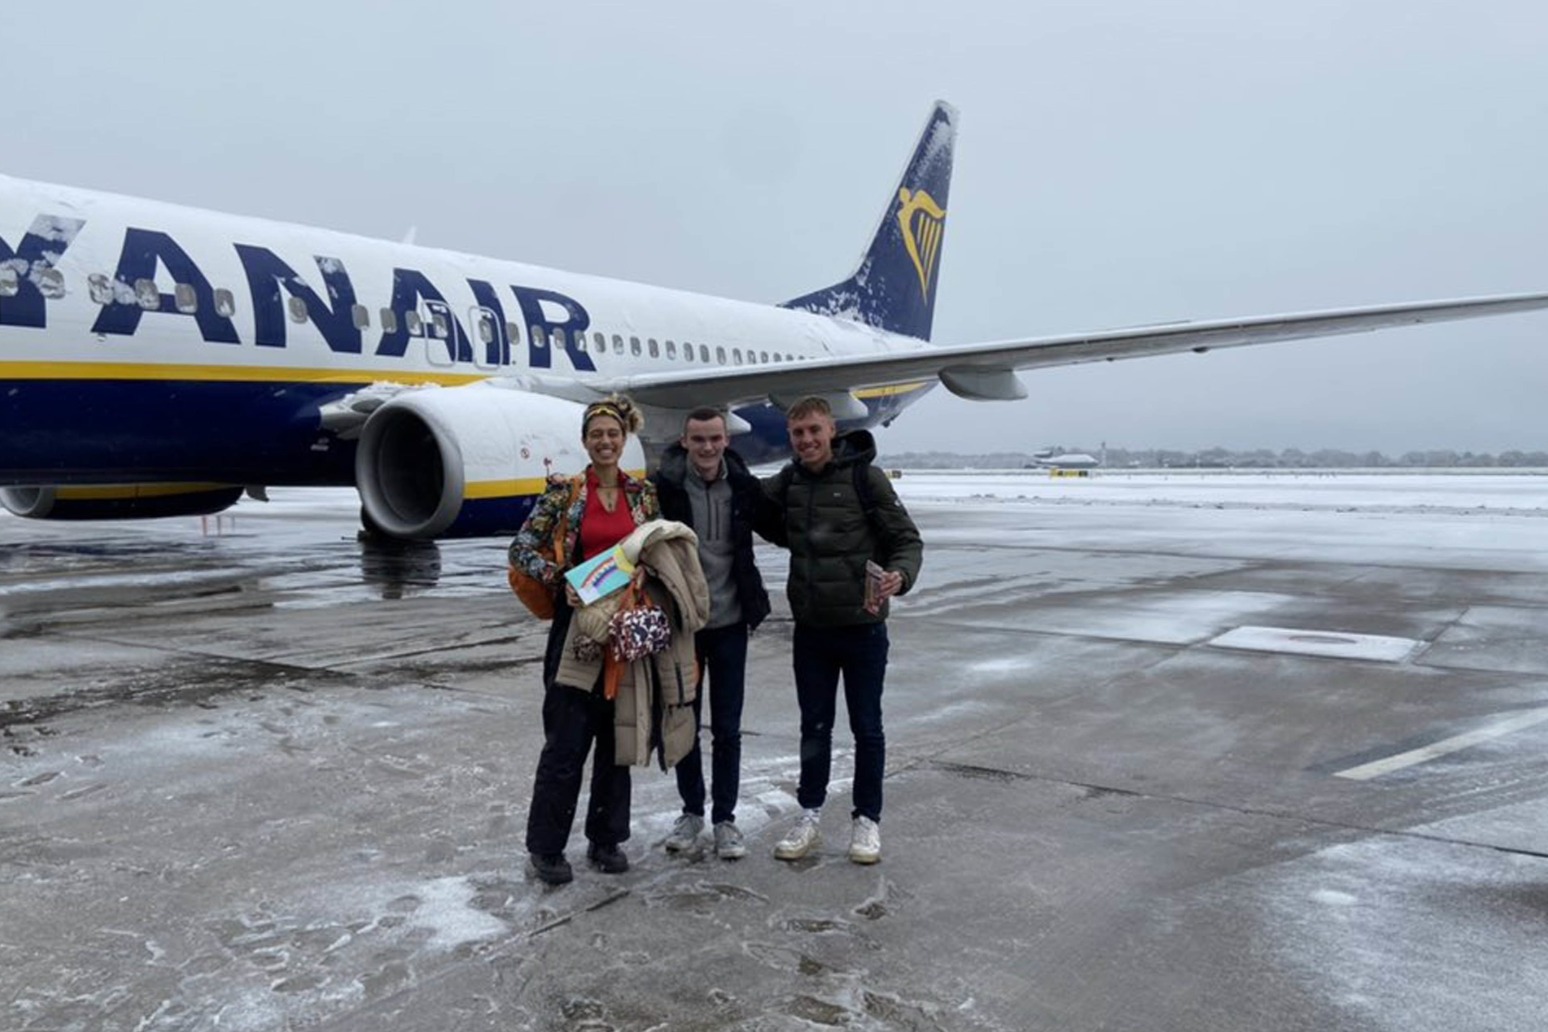 Snow closure at Manchester Airport leaves passengers stranded for hours 